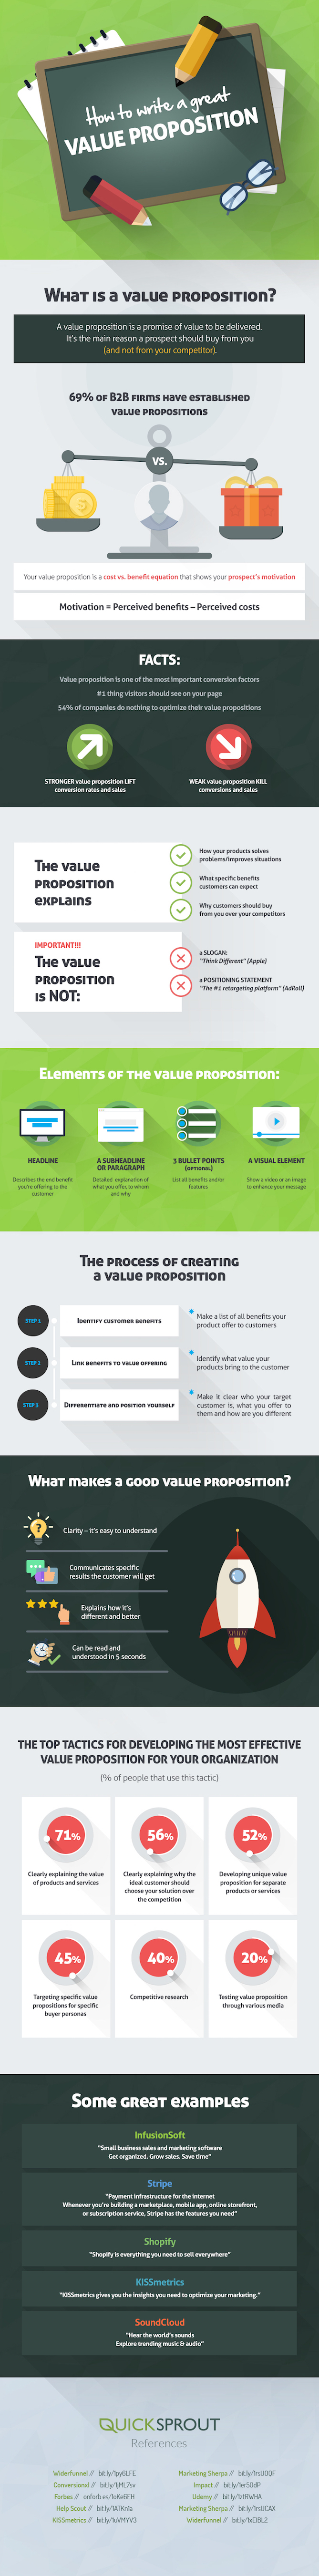 QuickSprout infographic with value proposition definition and how to write a value proposition